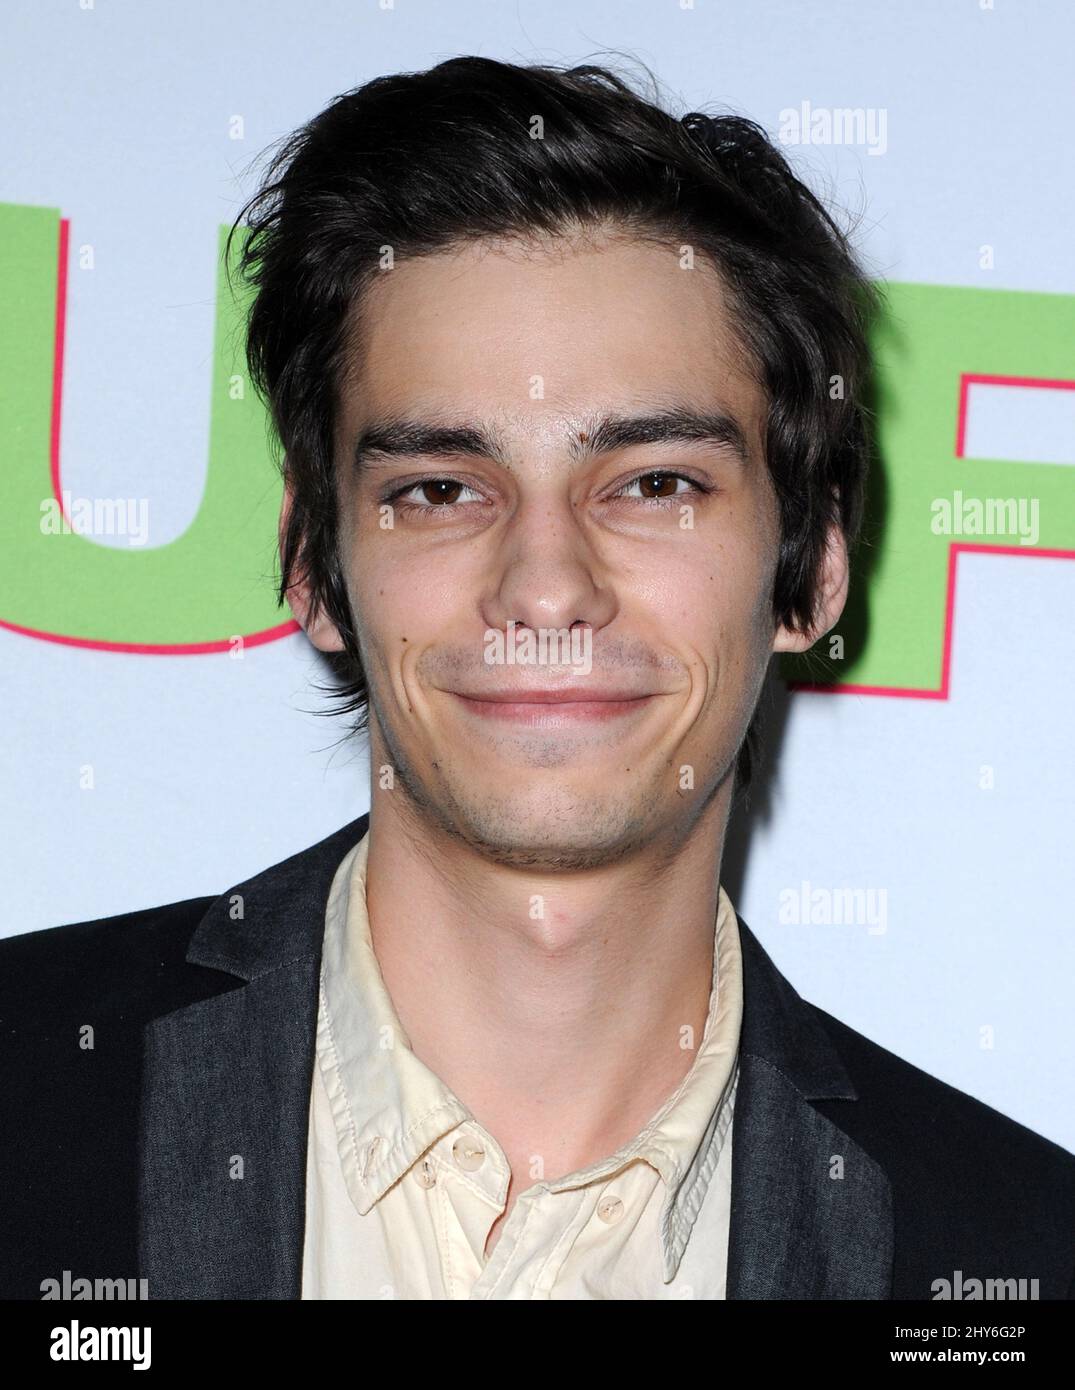 Devon Bostick arriving for The Duff fan screening held at TCL Chinese 6 Theatres, Hollywood, Los Angeles. Stock Photo